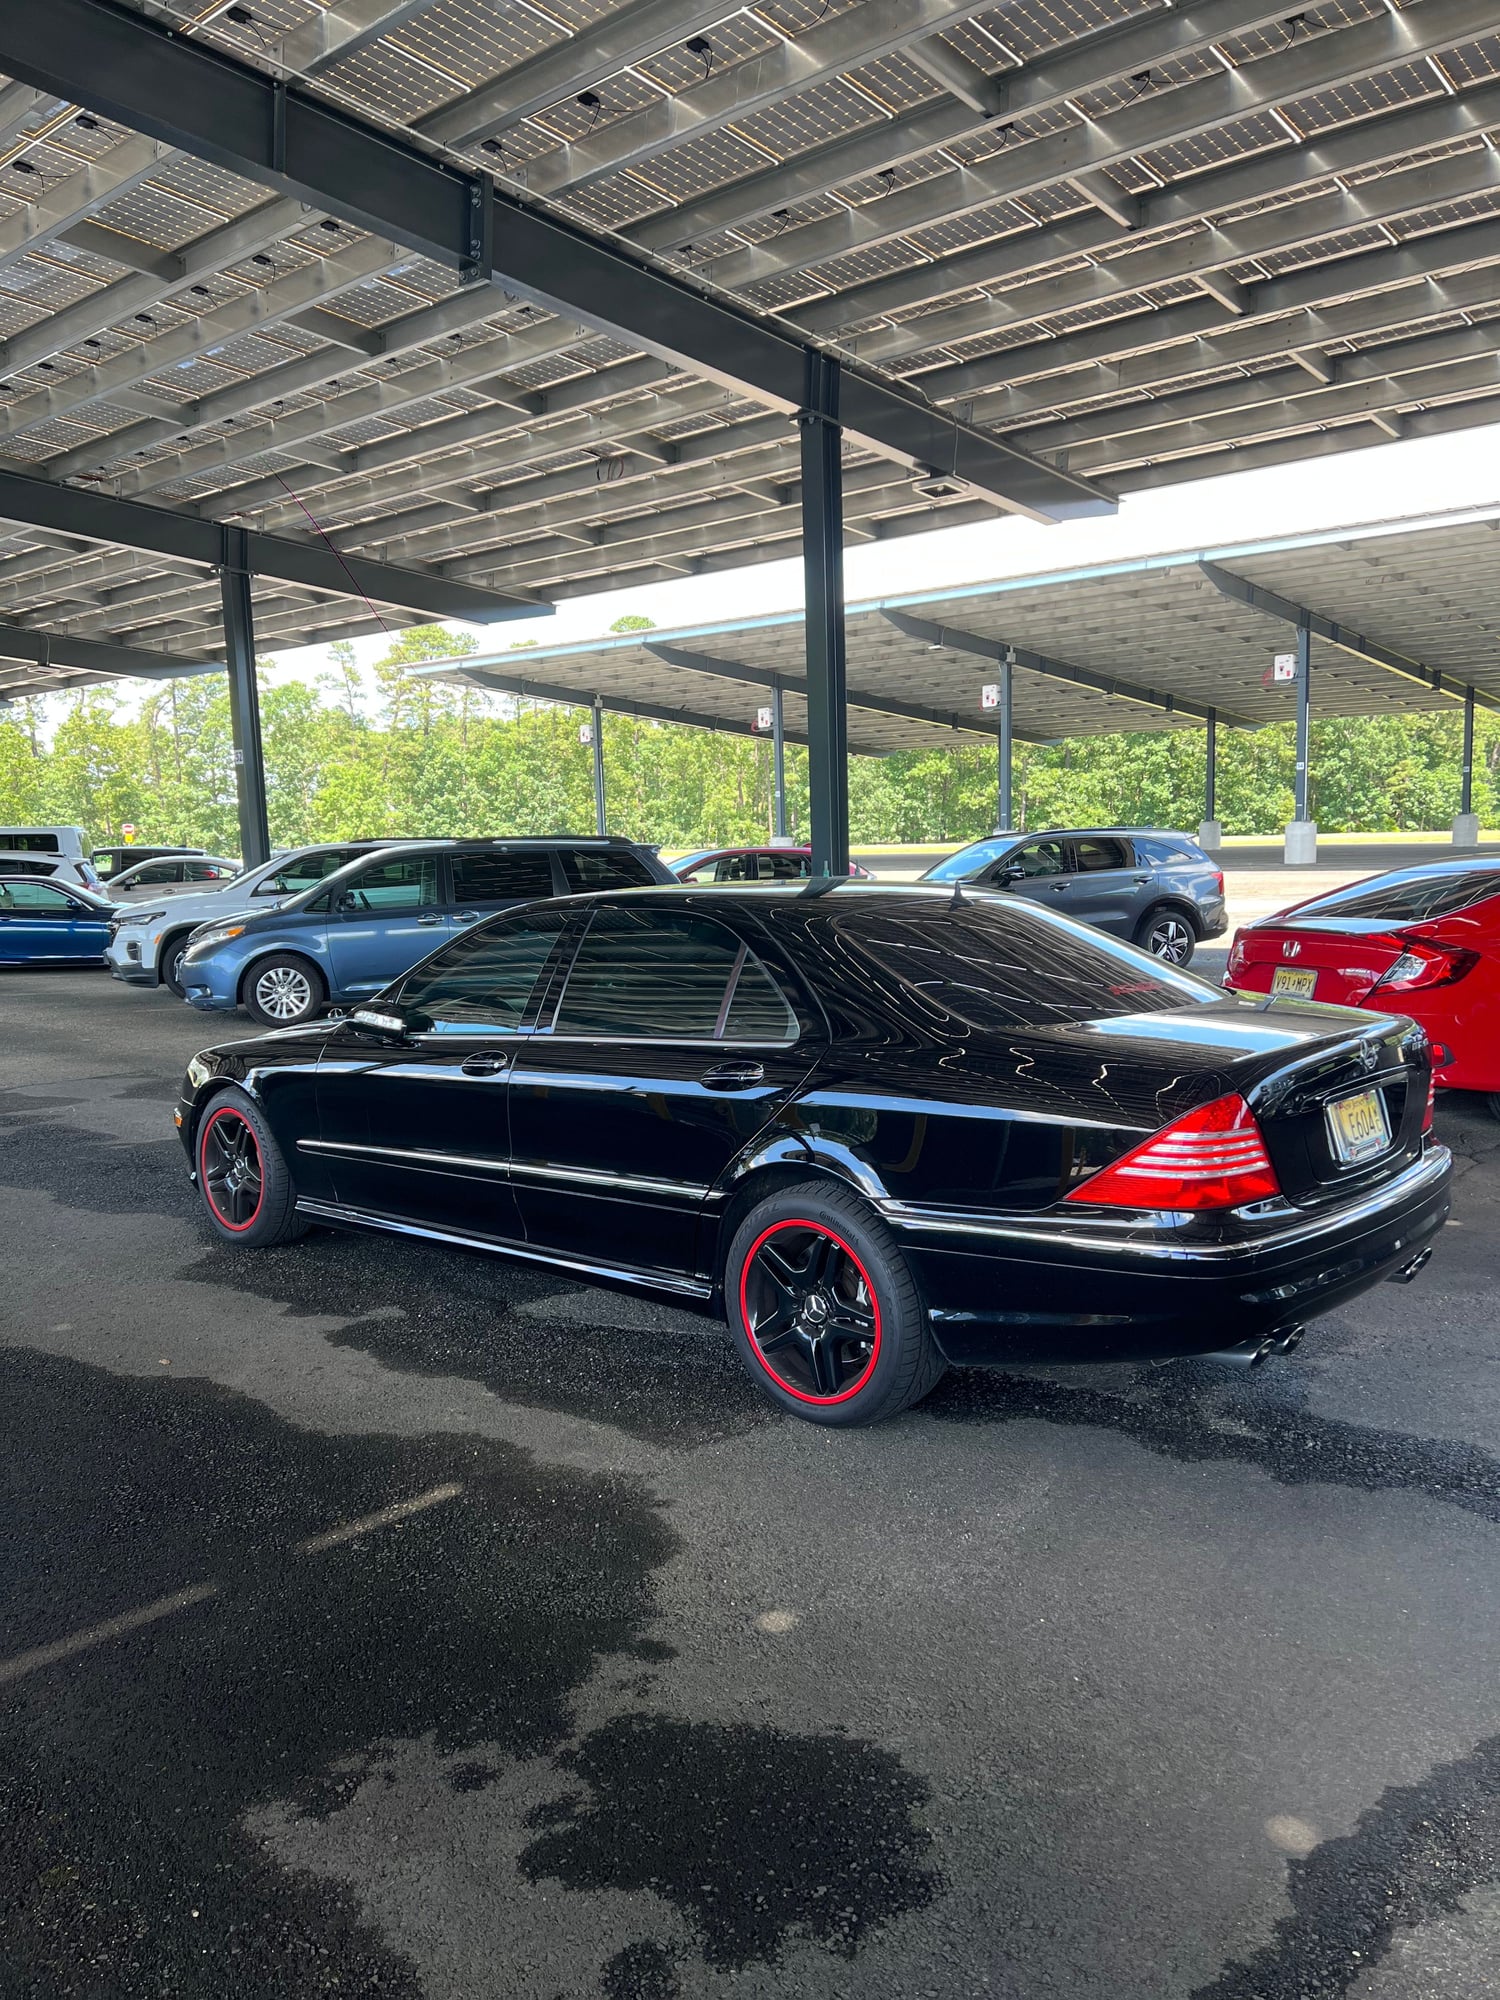 2003 Mercedes-Benz S55 AMG - 2003 S55 AMG - Used - VIN WDBNG74JX3A348074 - 79,800 Miles - 8 cyl - 2WD - Automatic - Sedan - Black - Howell, NJ 07731, United States